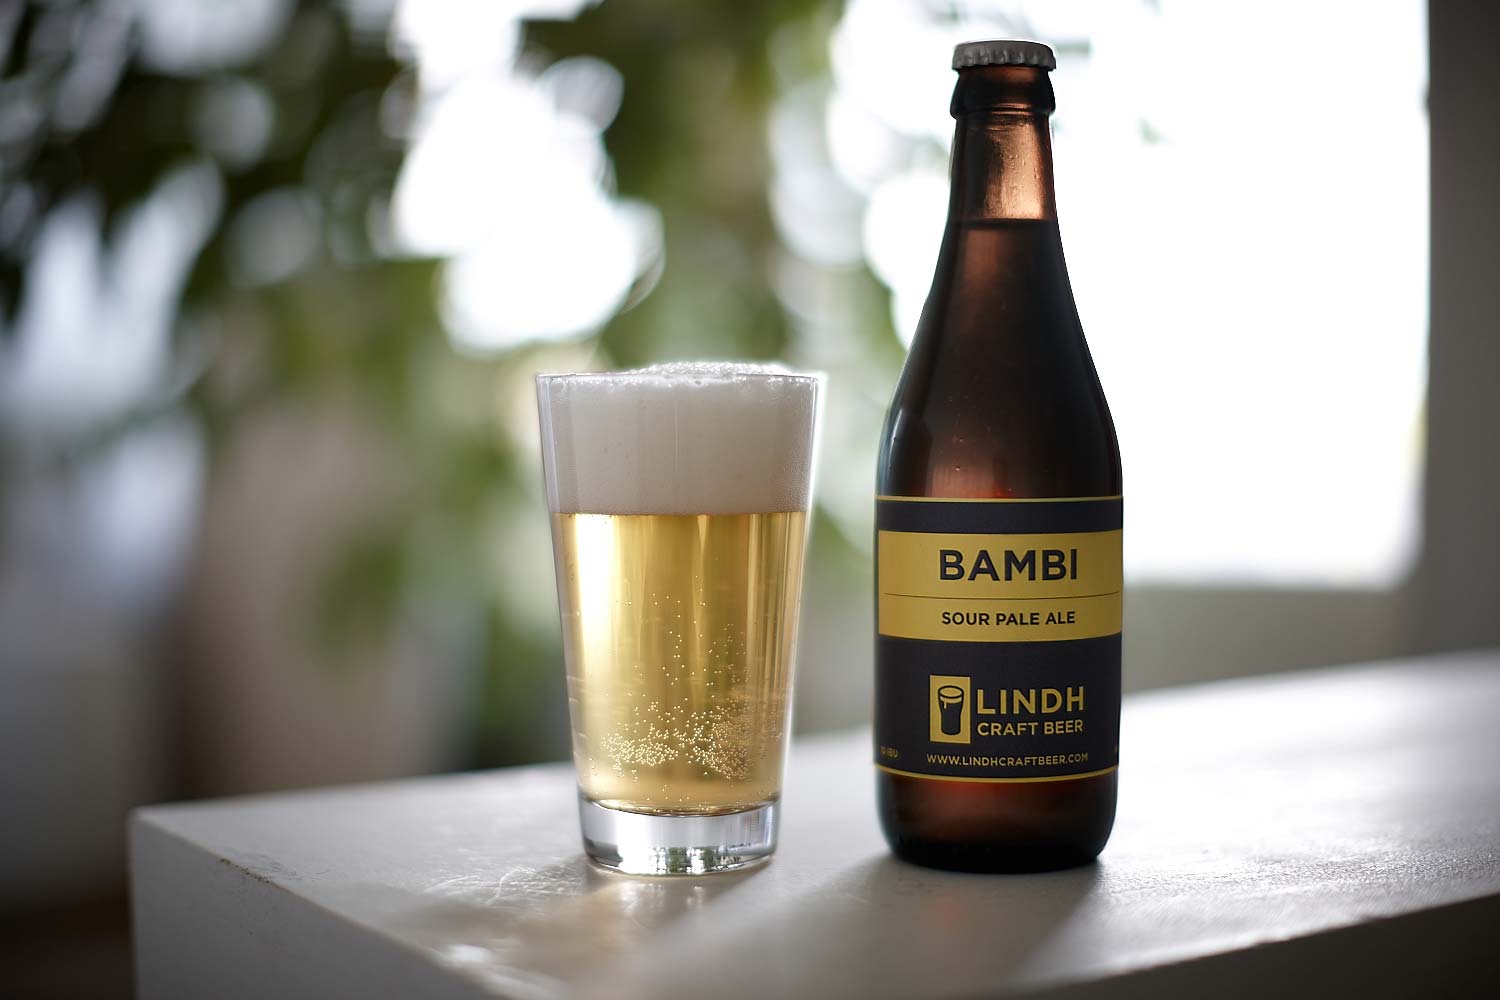 150419_lindh_craft_beer_bambi_sour_pale_ale_0001